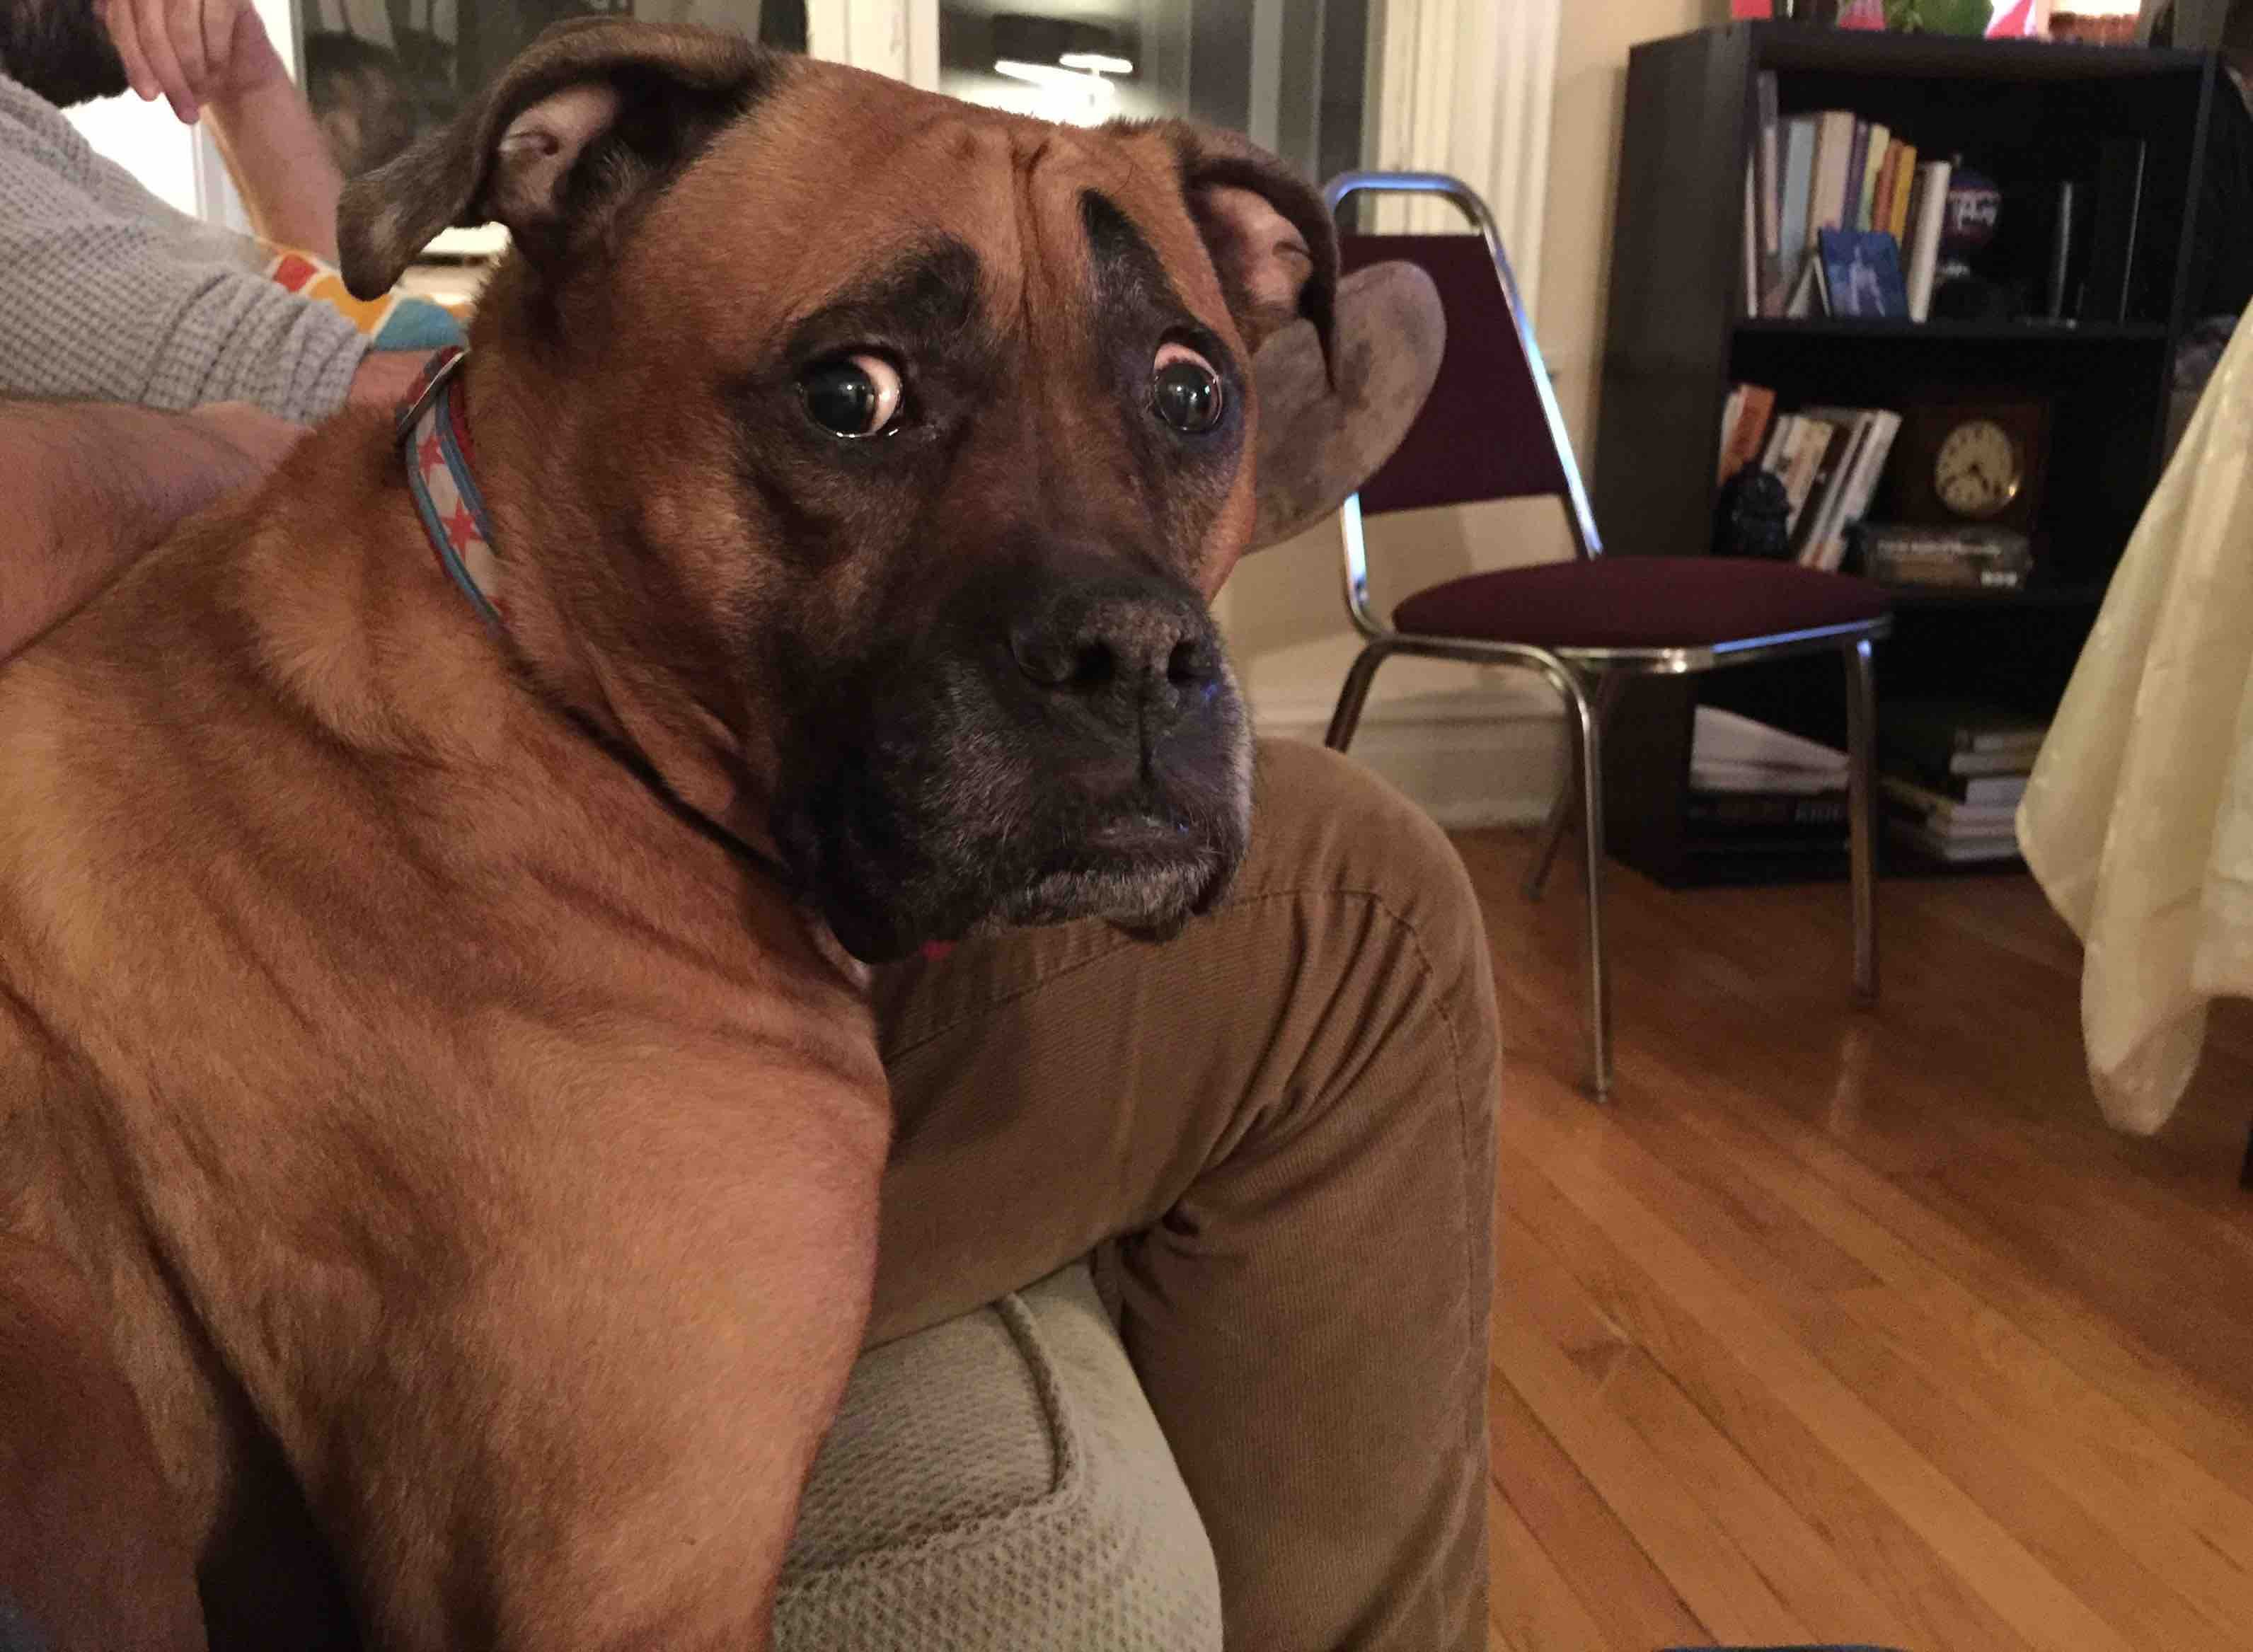 My friend's dog is always concerned about everything